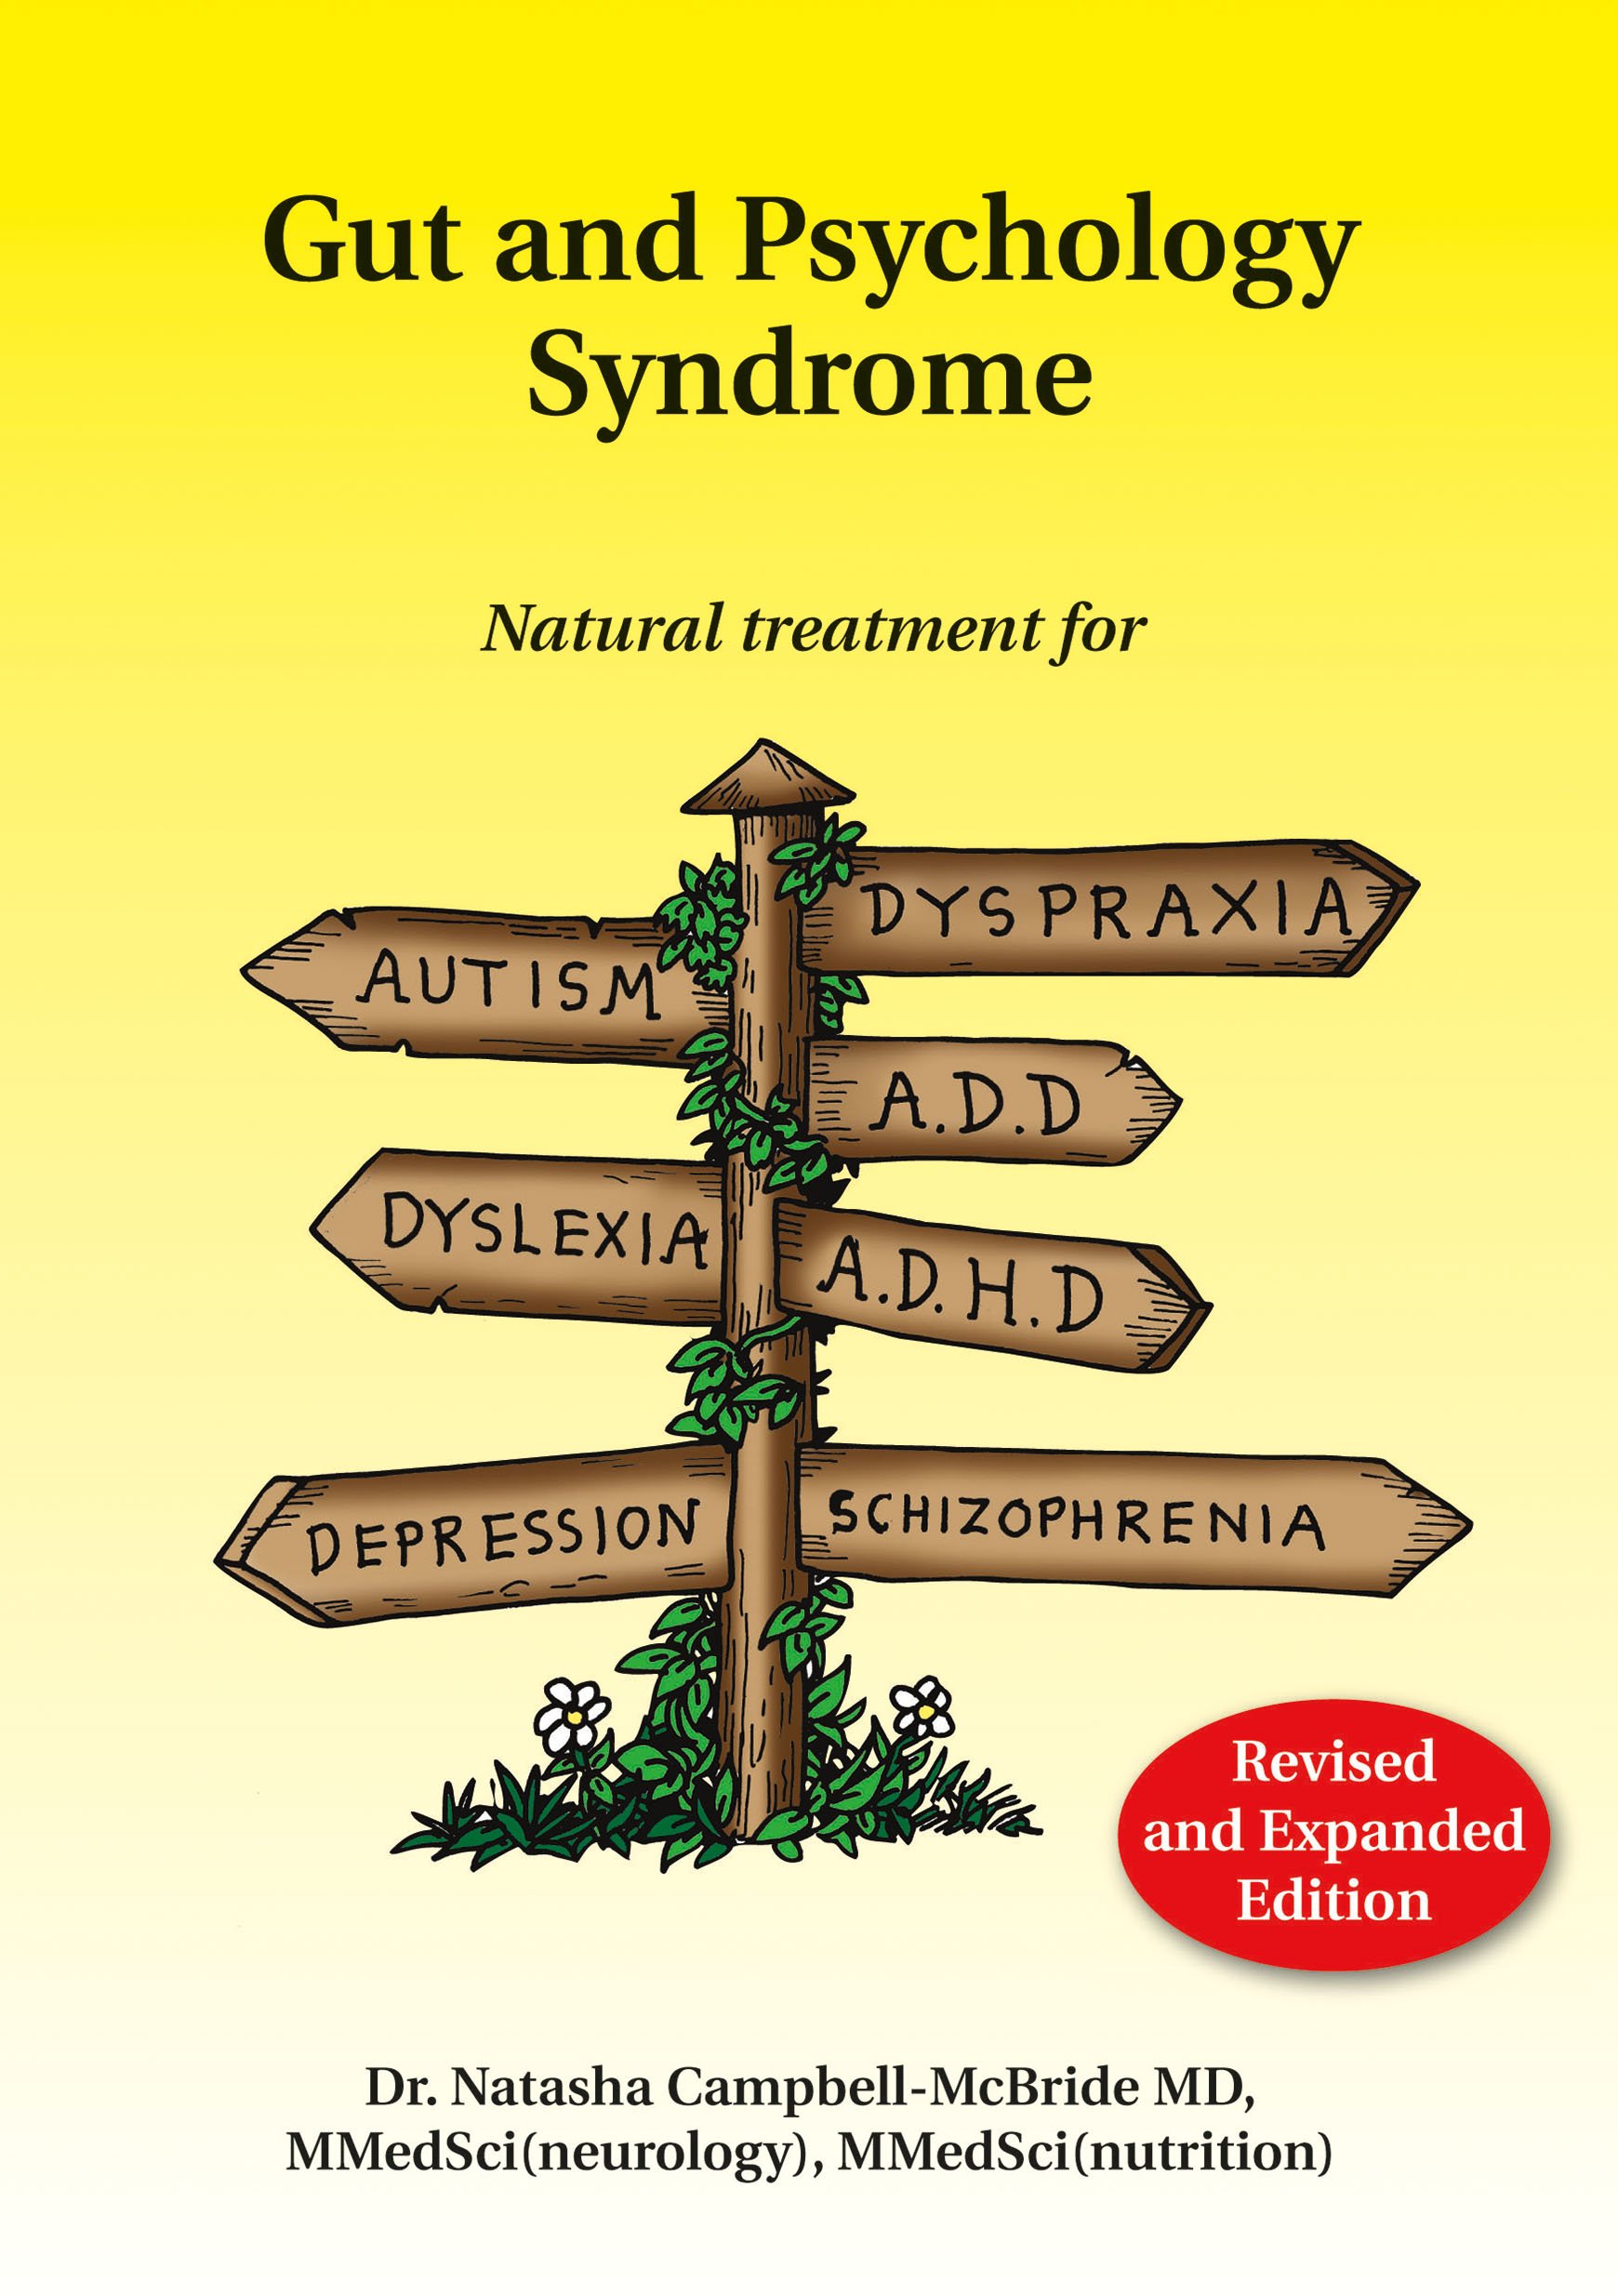 The Gut and Psychology Syndrome cover